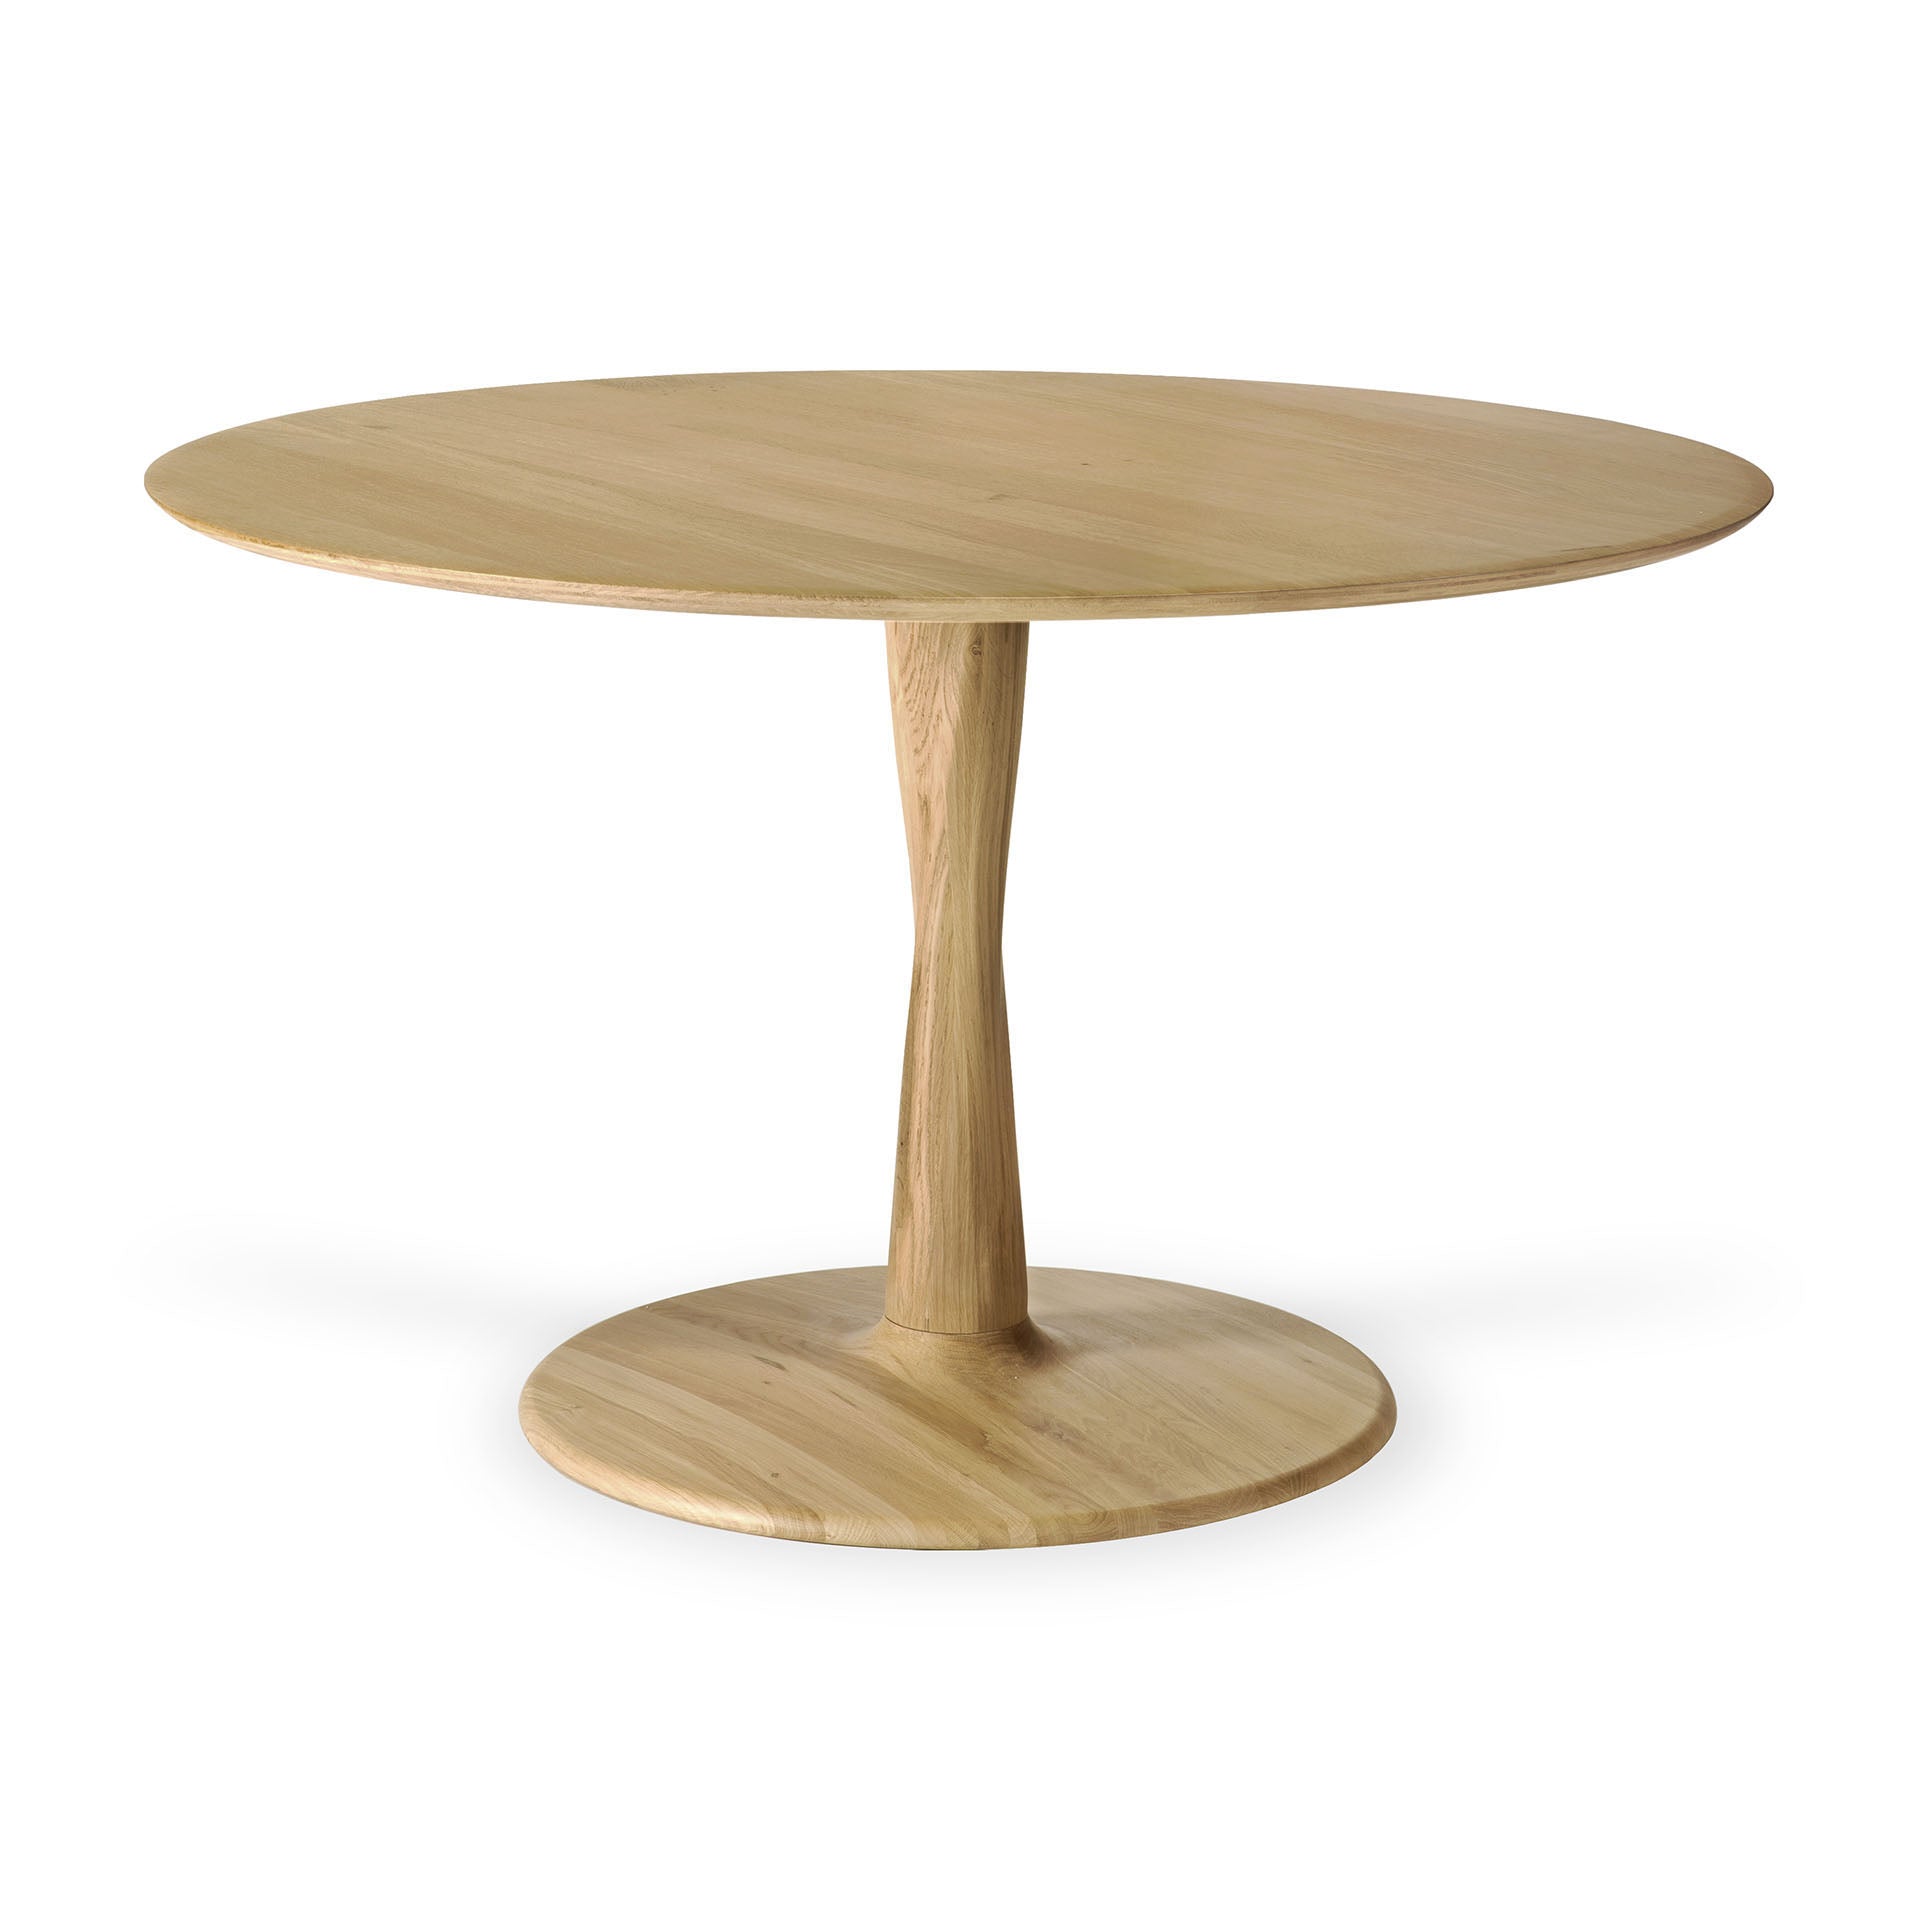 Ethnicraft Torsion Oak Round Dining Table